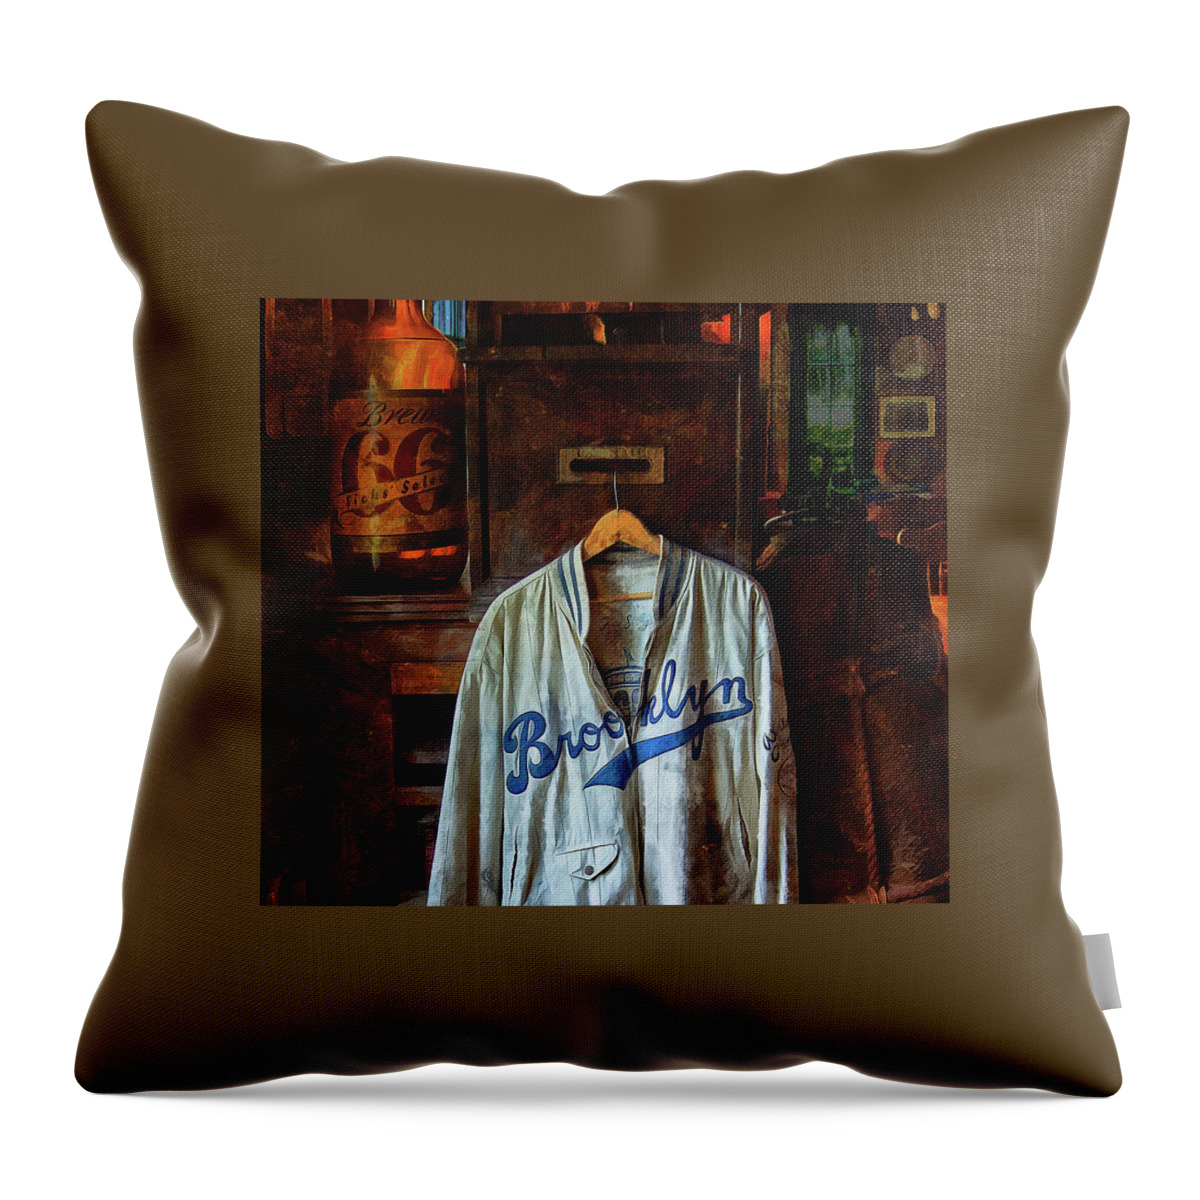 Nostalgic Throw Pillow featuring the photograph Brooklyn and Brew 66 by Thom Zehrfeld